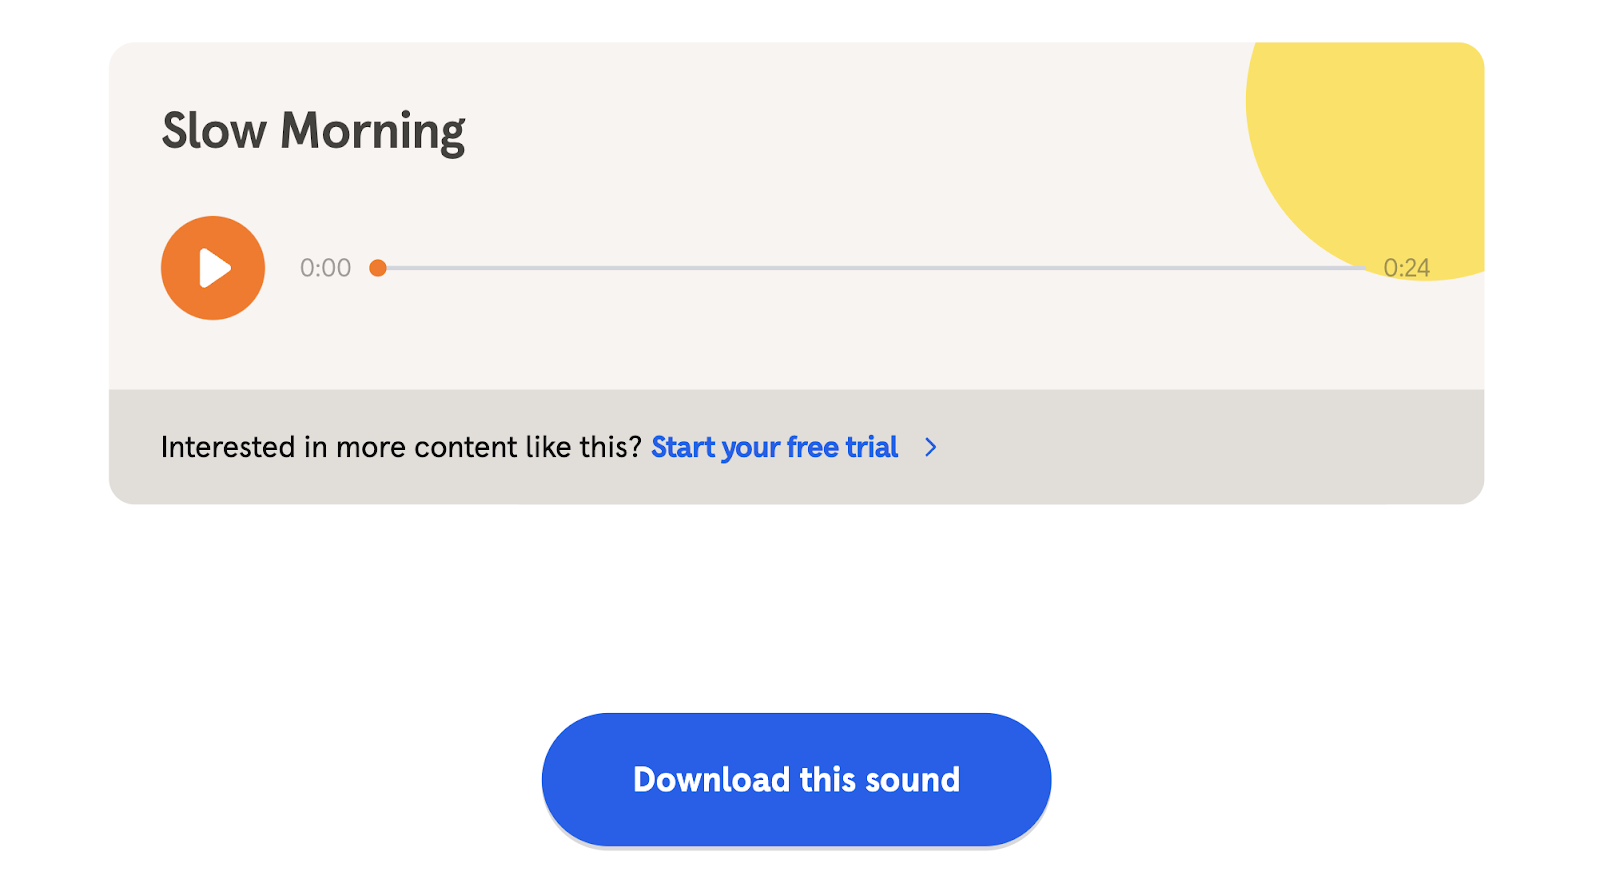 Slow morning mindful ringtone download on Headspace’s site